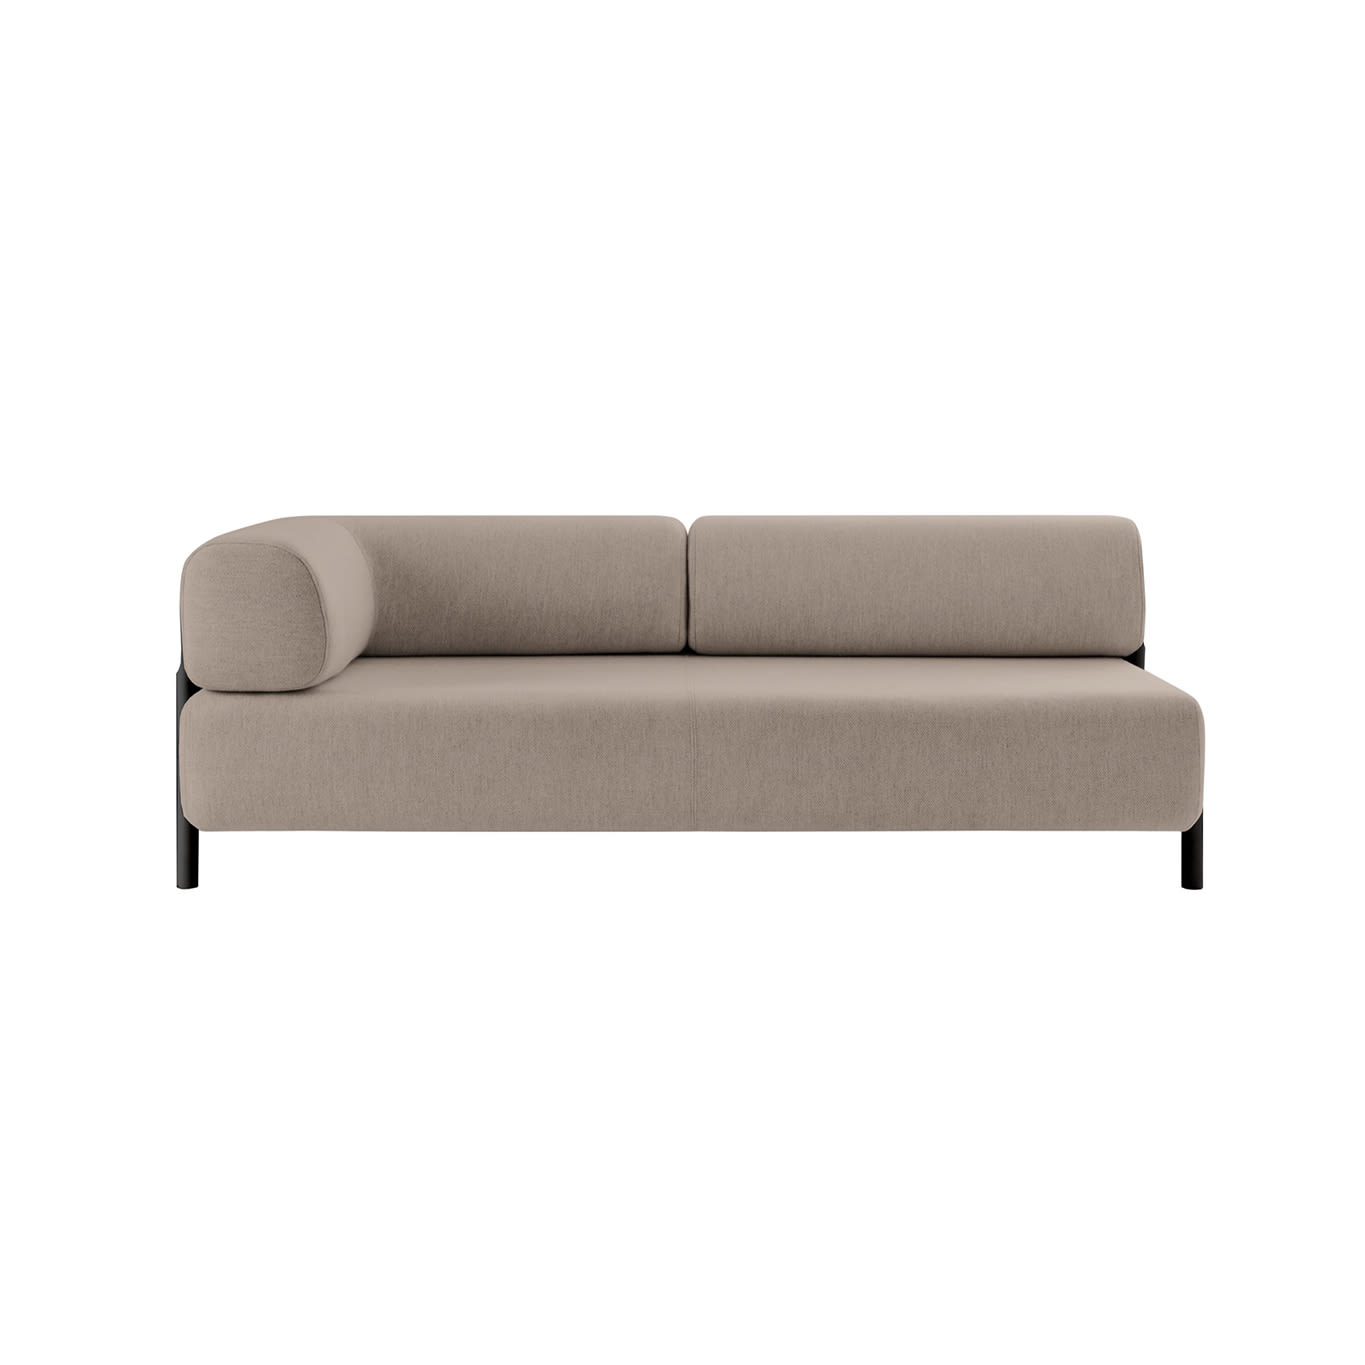 2-seater Sofa Chaise Left, Beige